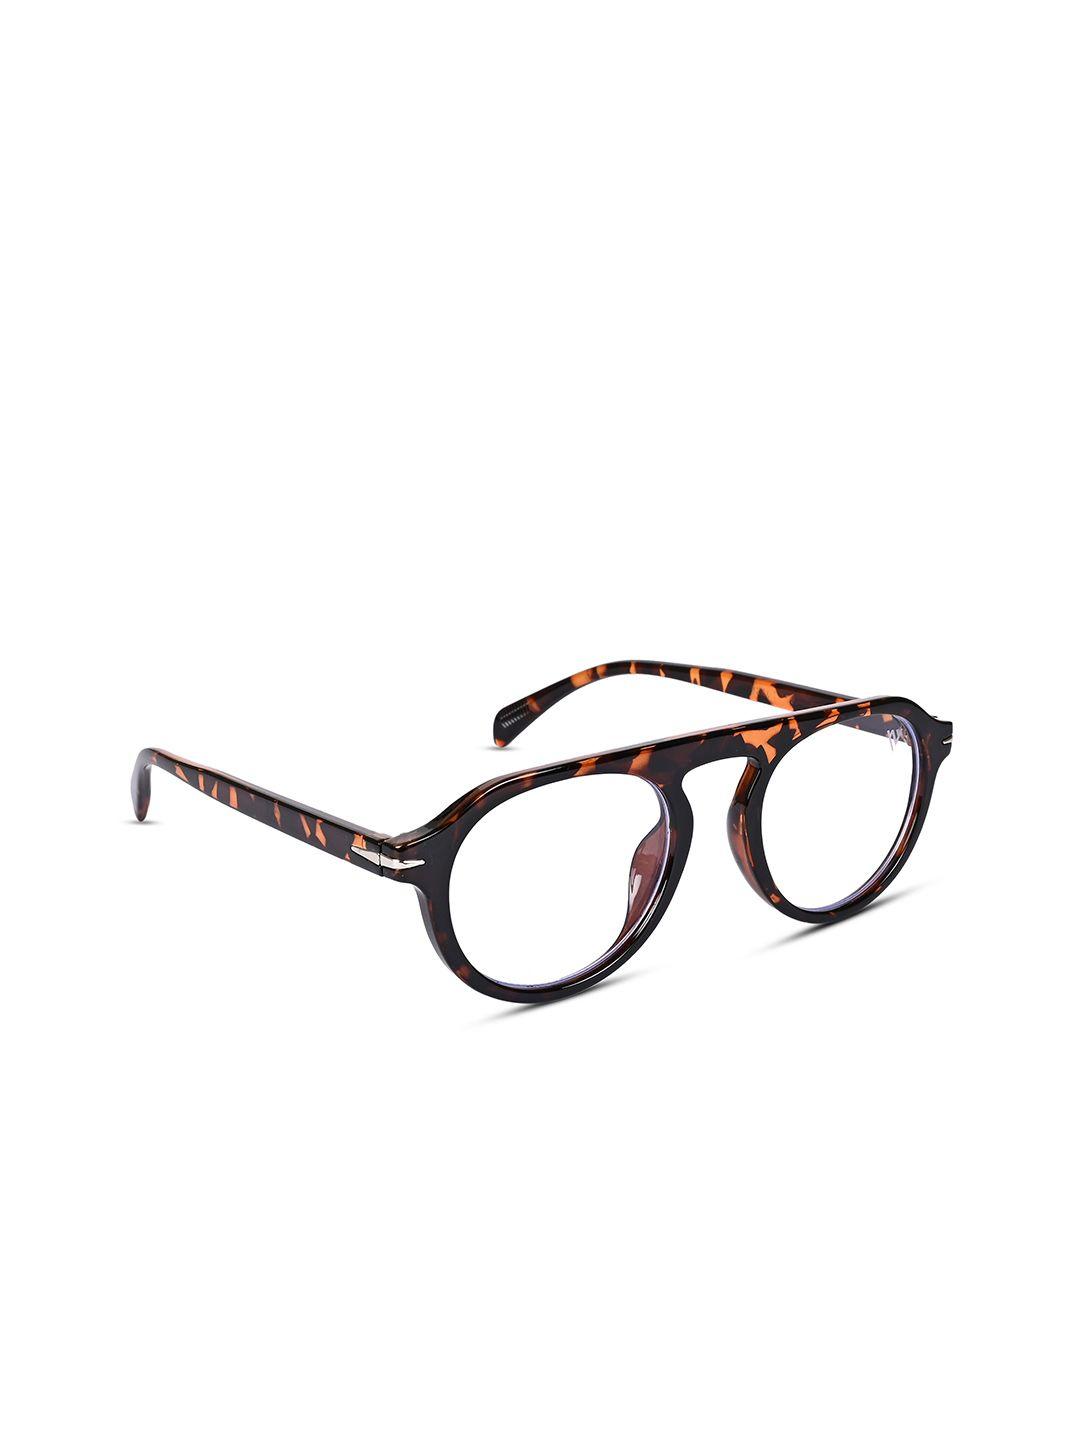 voyage unisex brown & yellow abstract full rim round frames